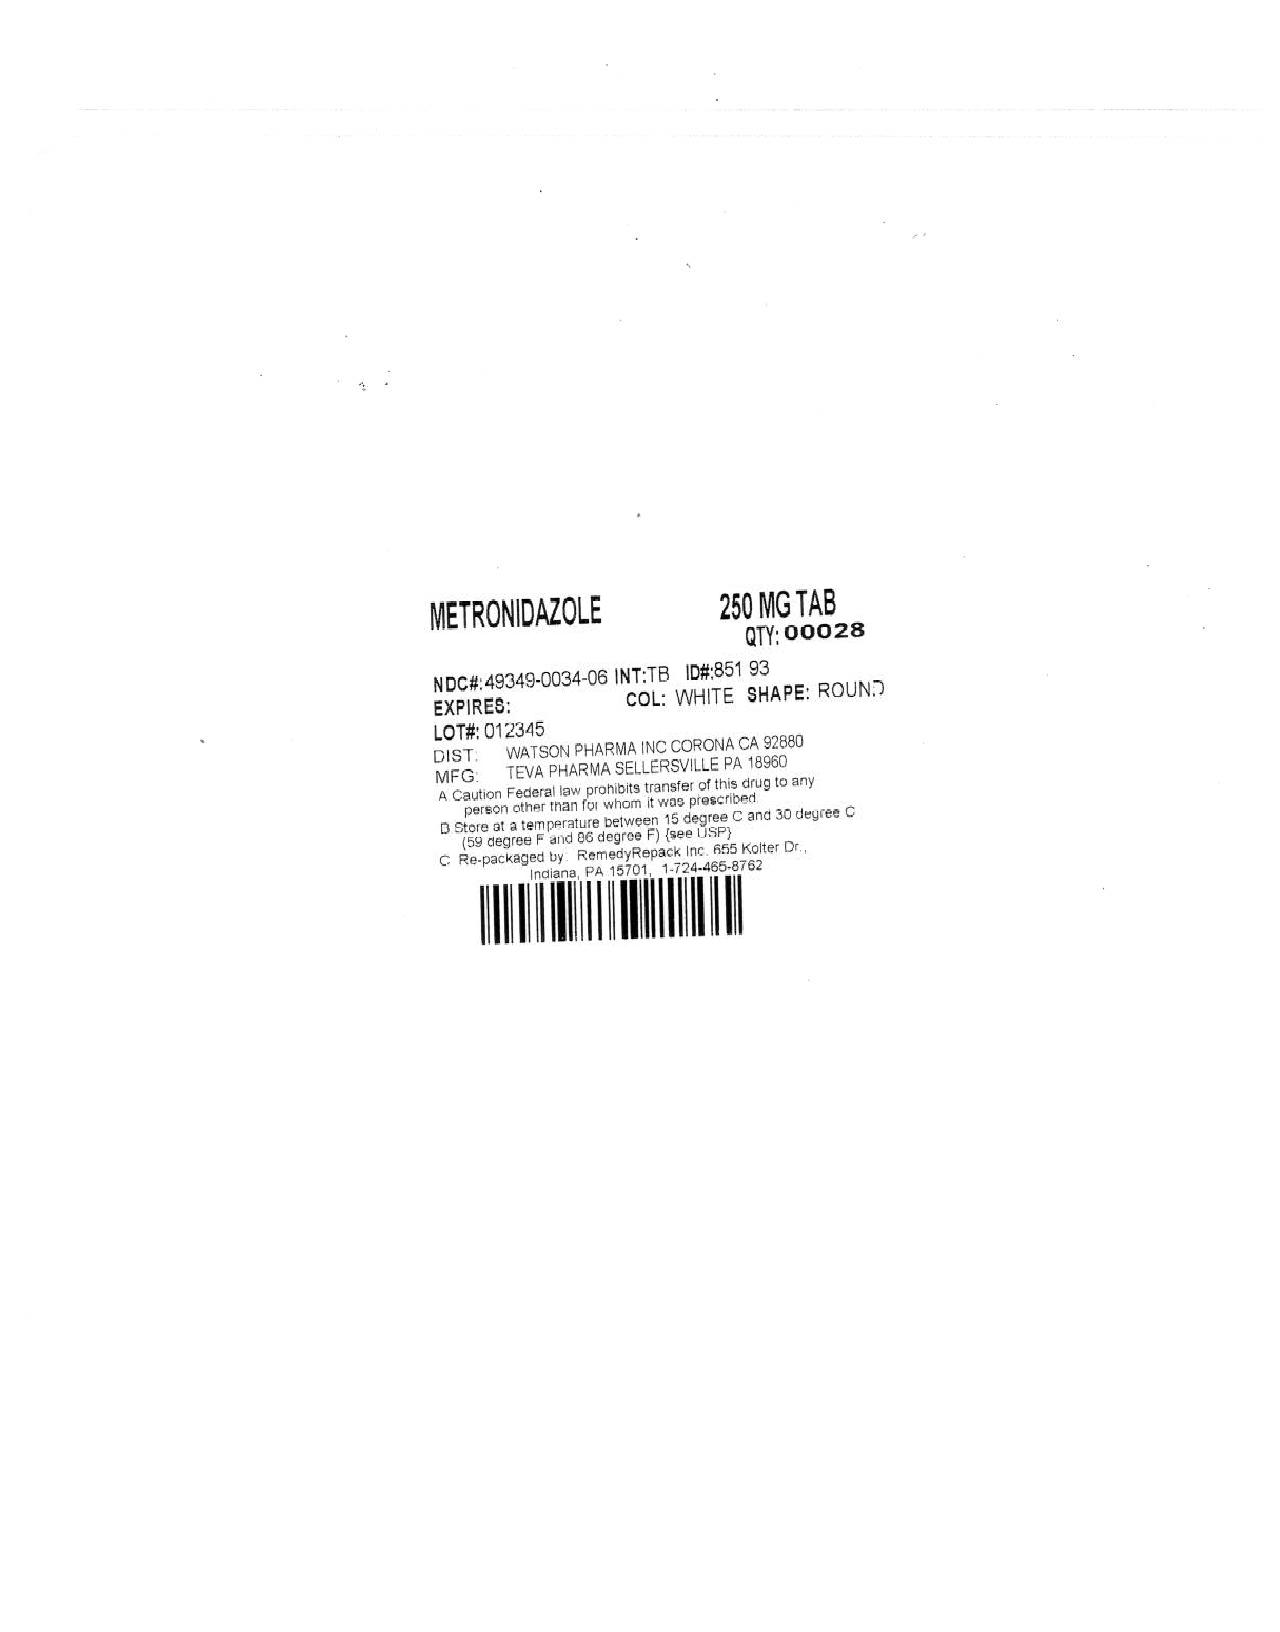 IMAGE OF PRODUCT LABEL 2